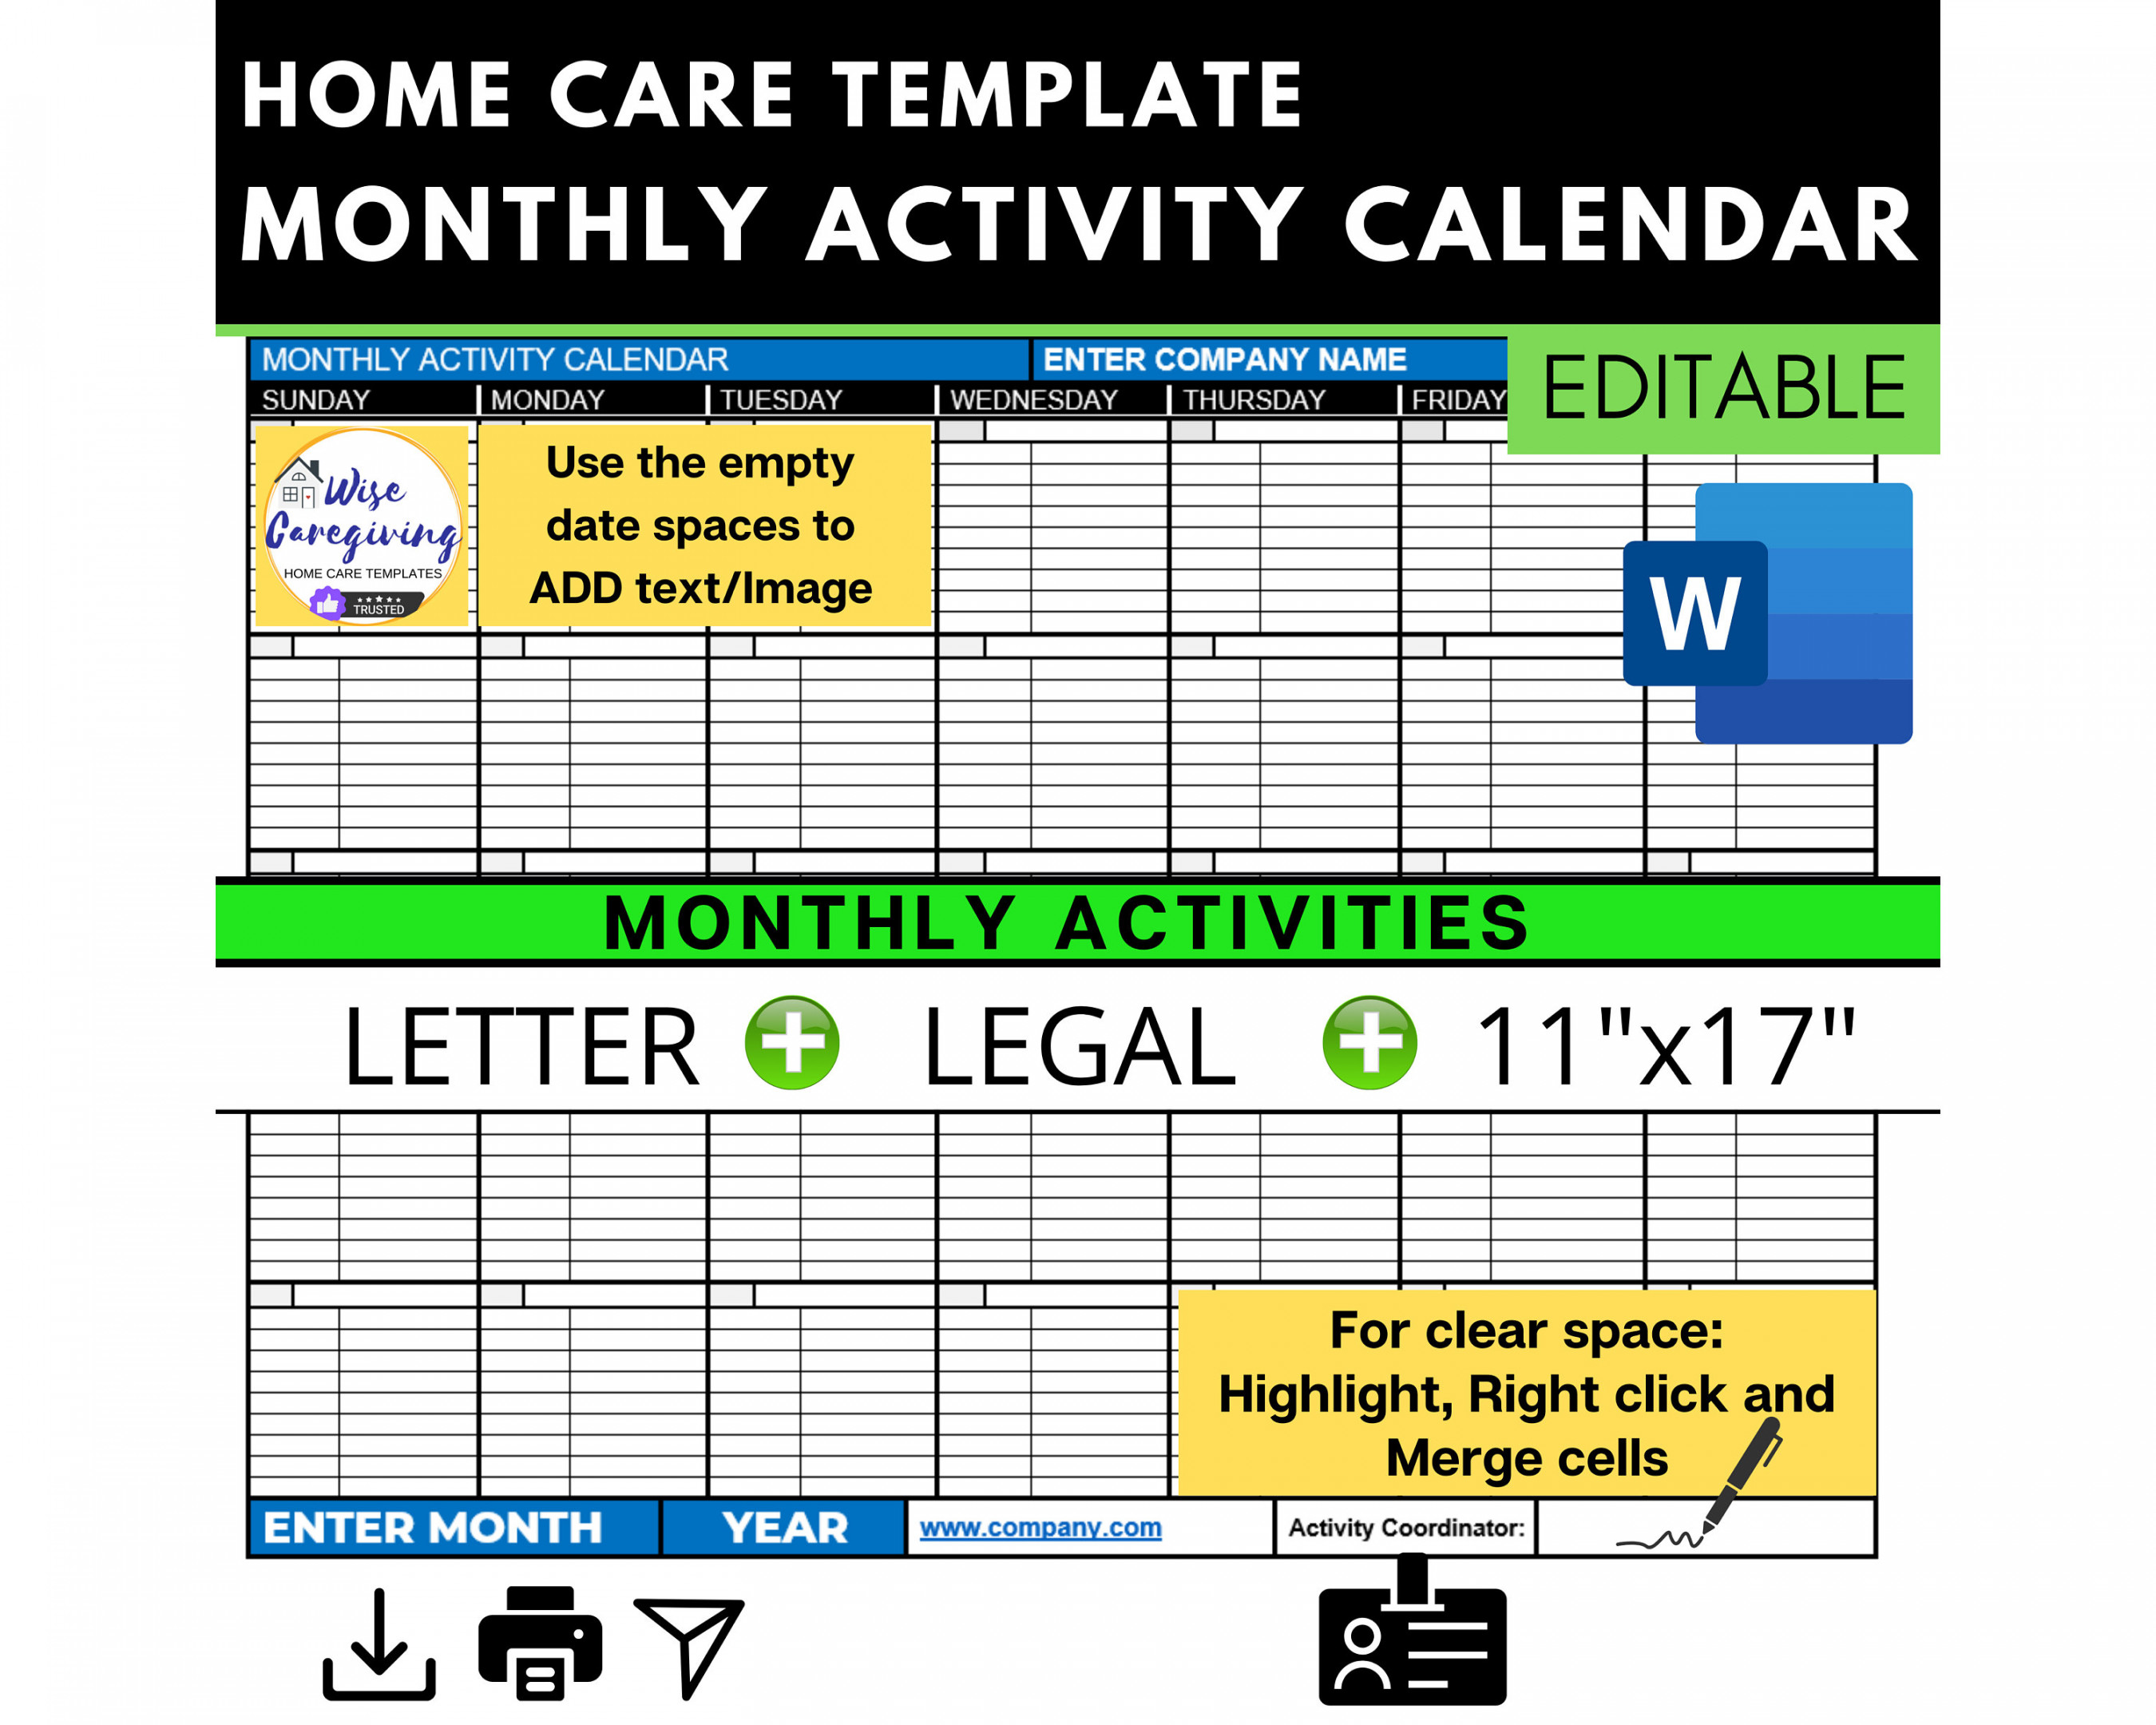 Monthly Activity Calendar, Home Care Template, Monthly Event